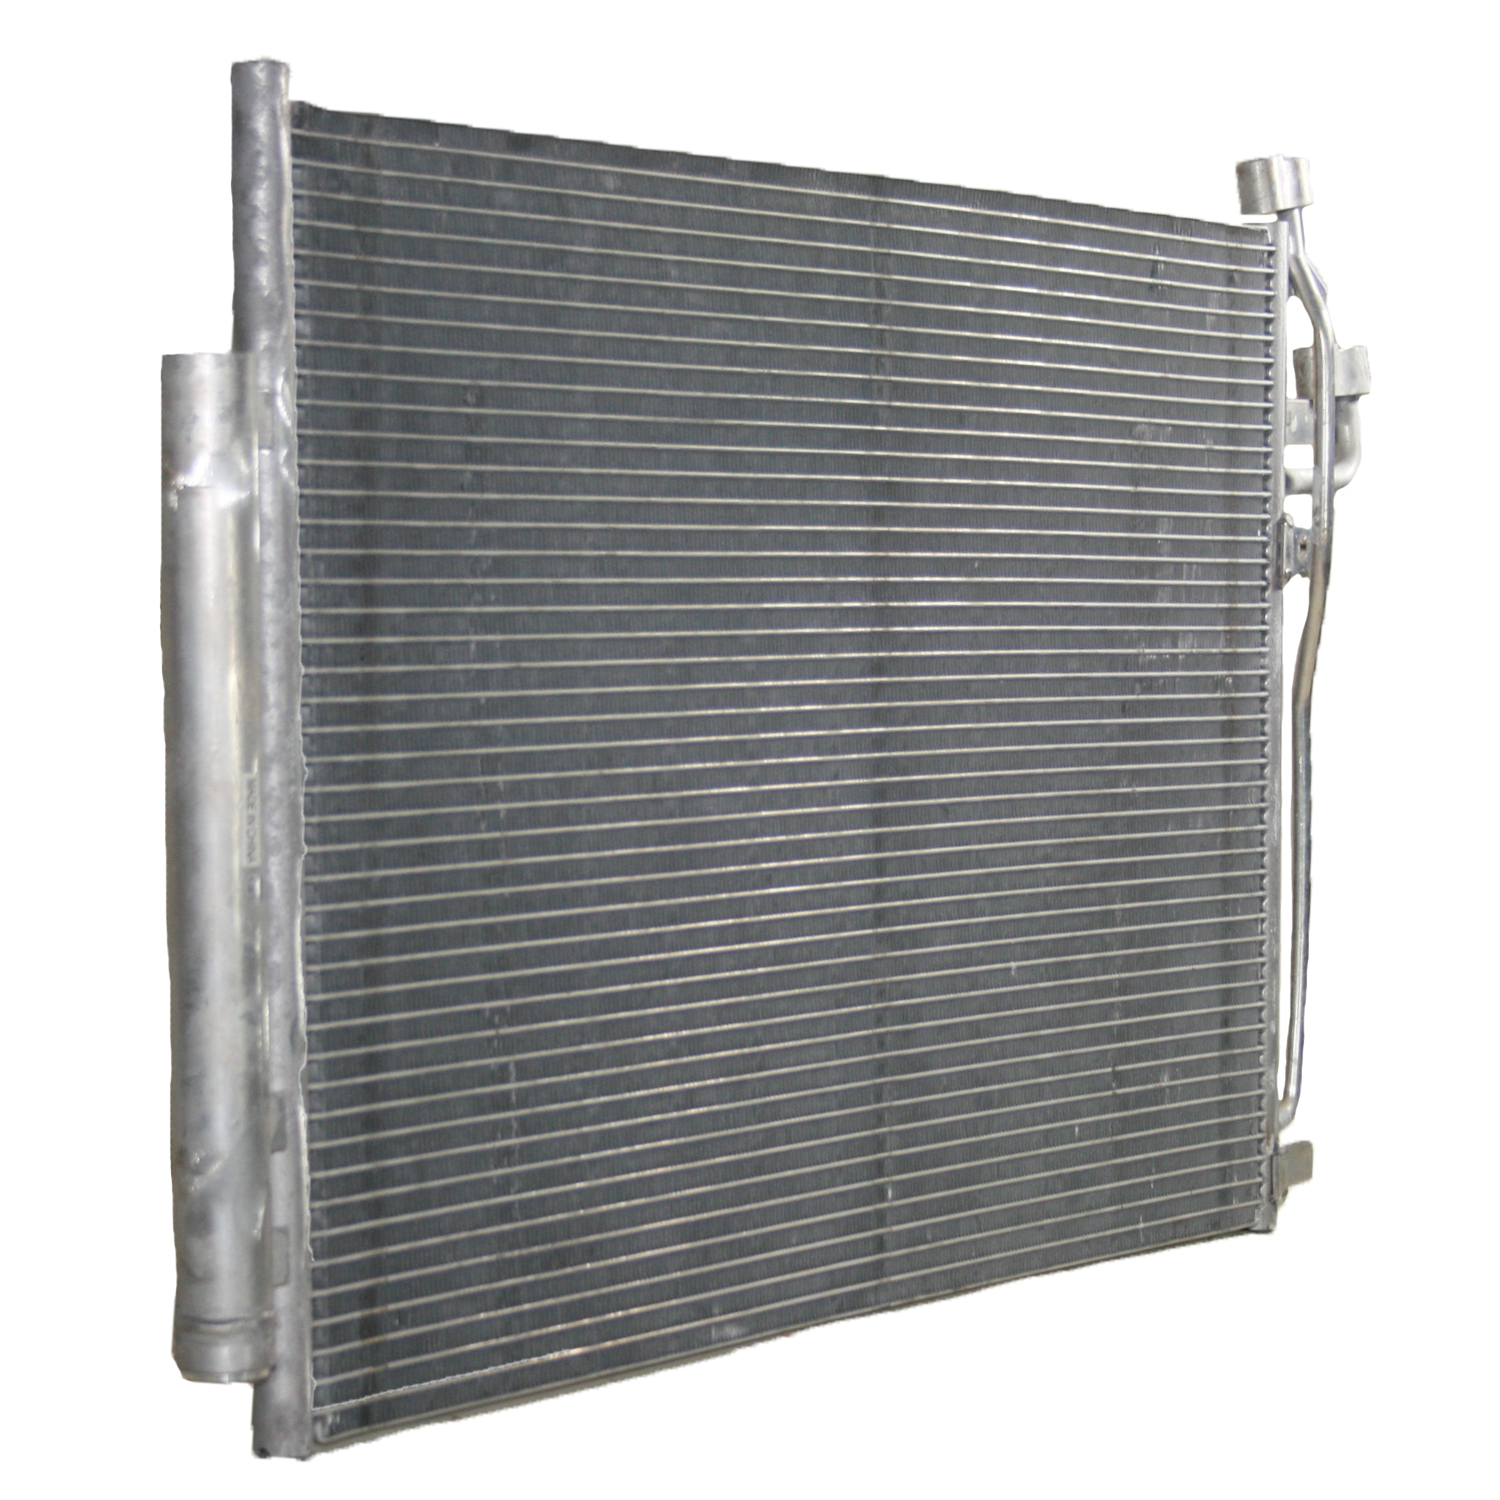 TCW Condenser 44-3687 New Product Image field_60b6a13a6e67c